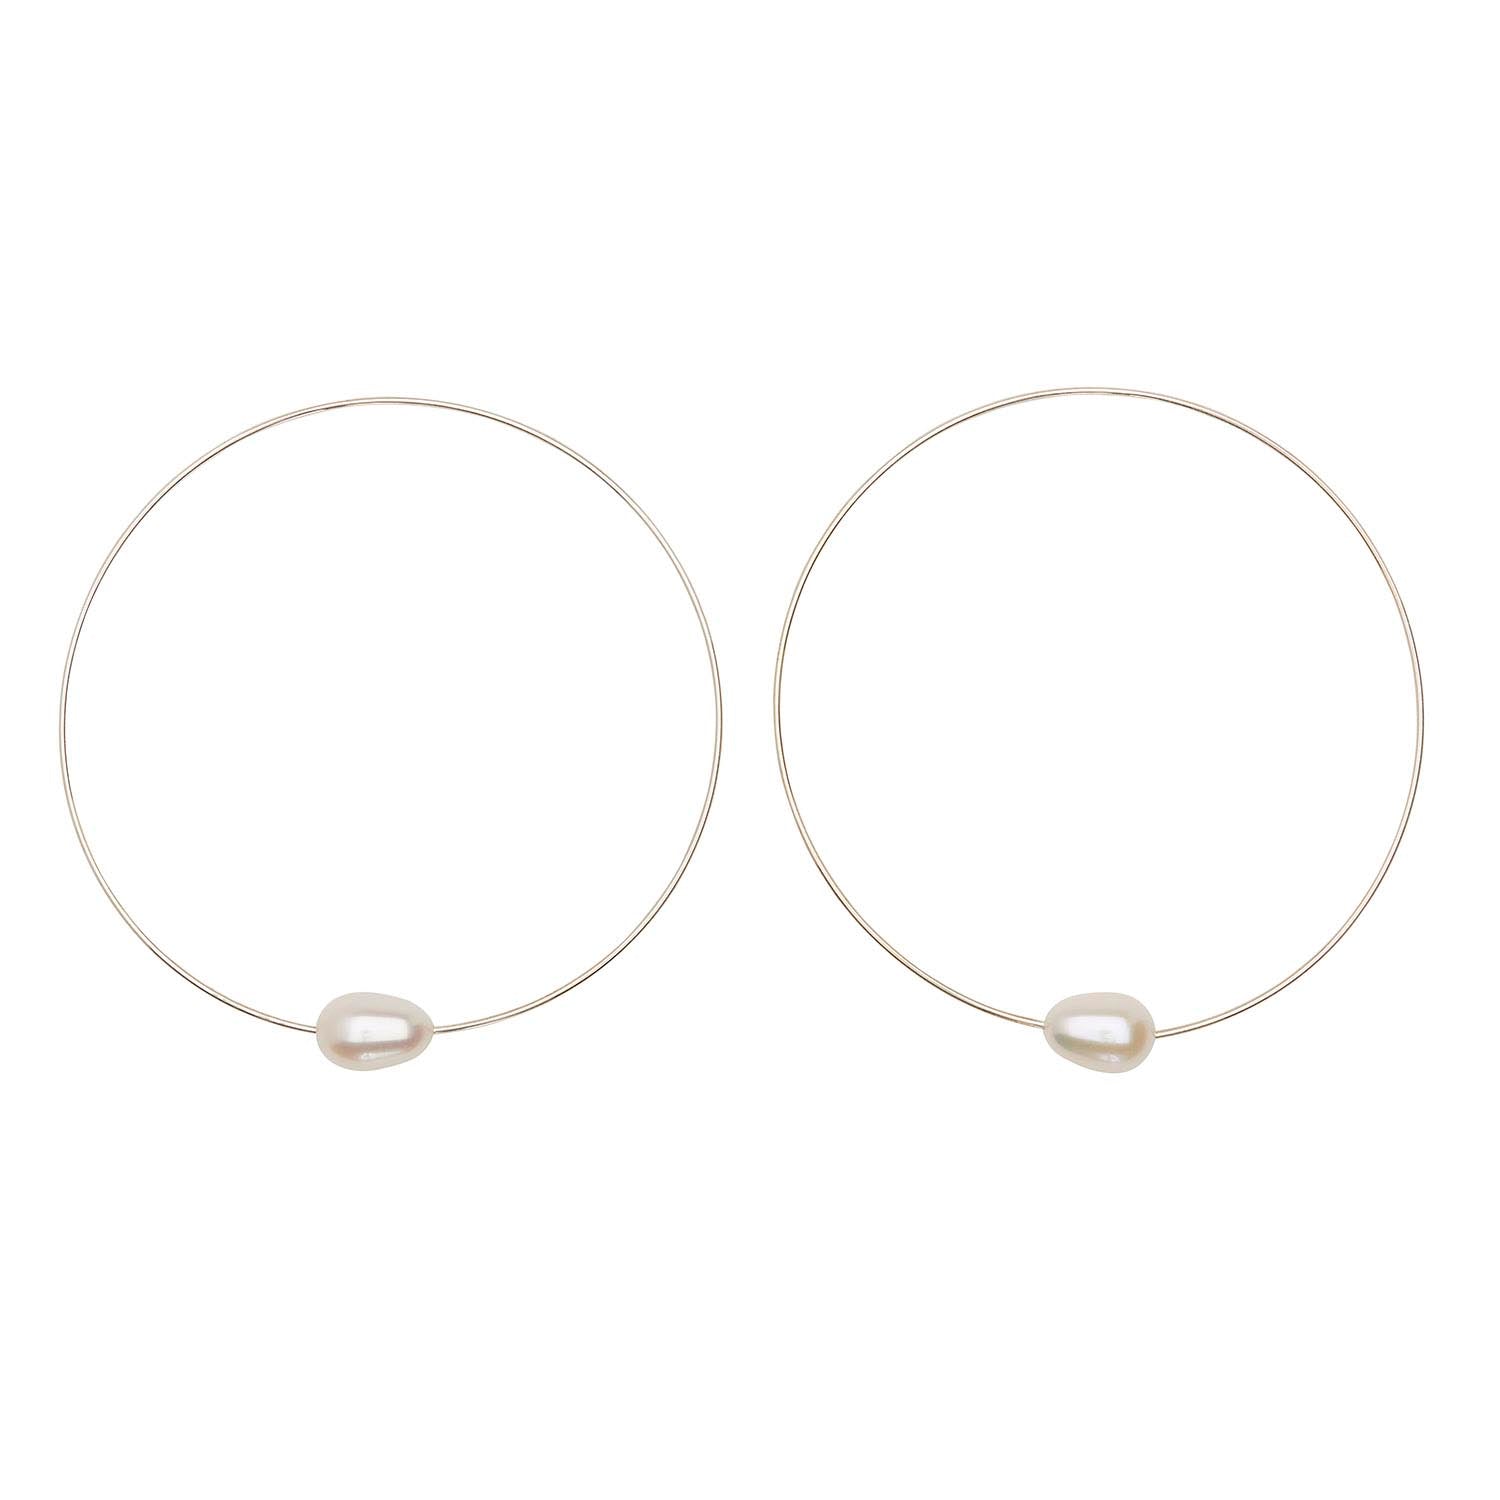 Medium Round Hoops with White Pearls